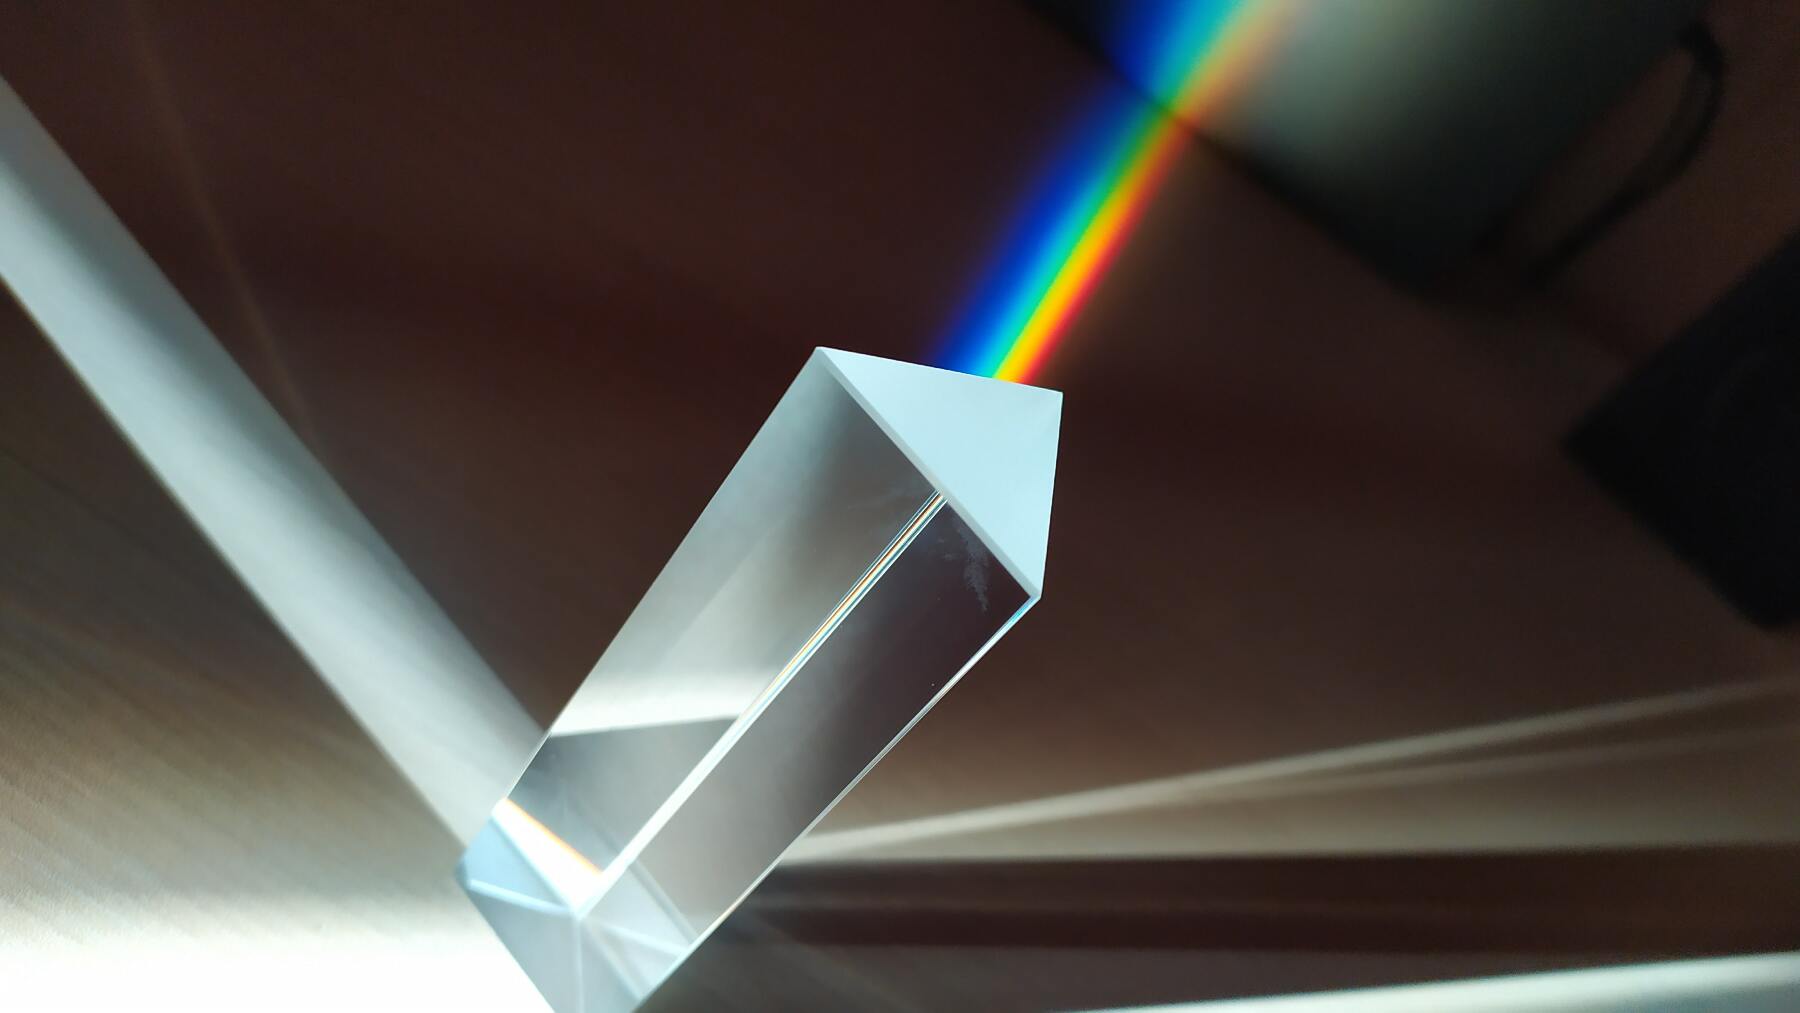 White light being split into colors by a prism. The white light shines on the prism from the bottom left, and a big part of it is refracted and split as it passes through the prism. image credit Pexels